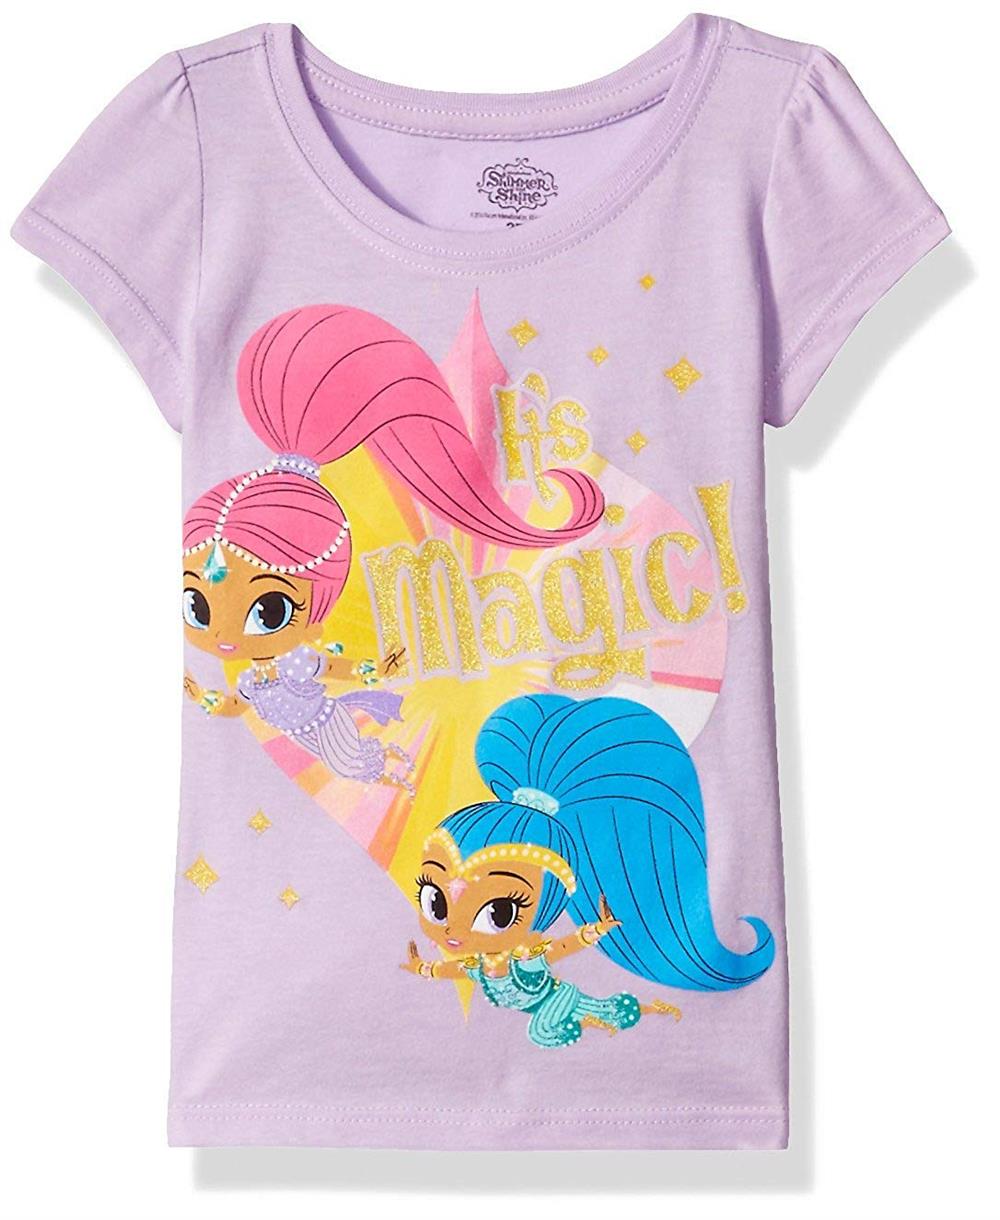 Shimmer and Shine Girls' 2T-4T Character Hoodie T-Shirt Set